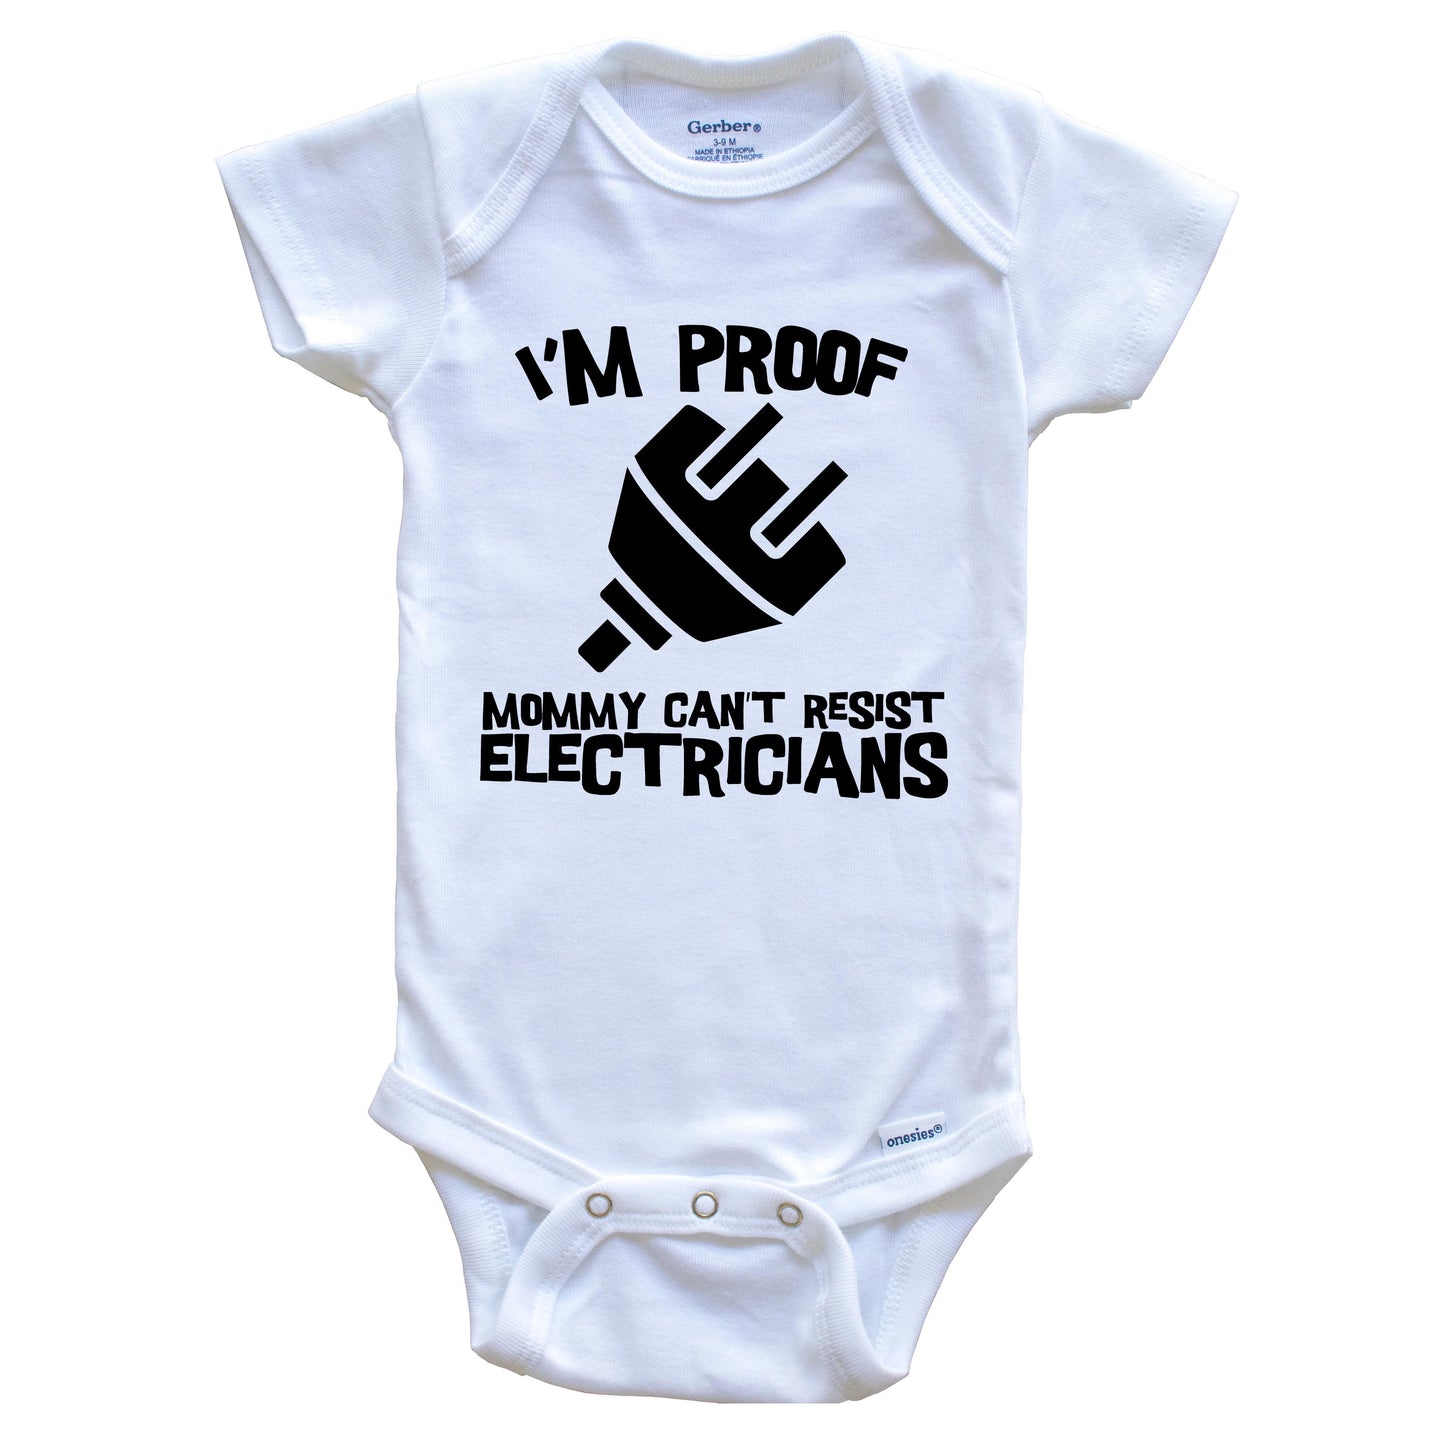 I'm Proof Mommy Can't Resist Electricians Funny Electrician Baby Onesie